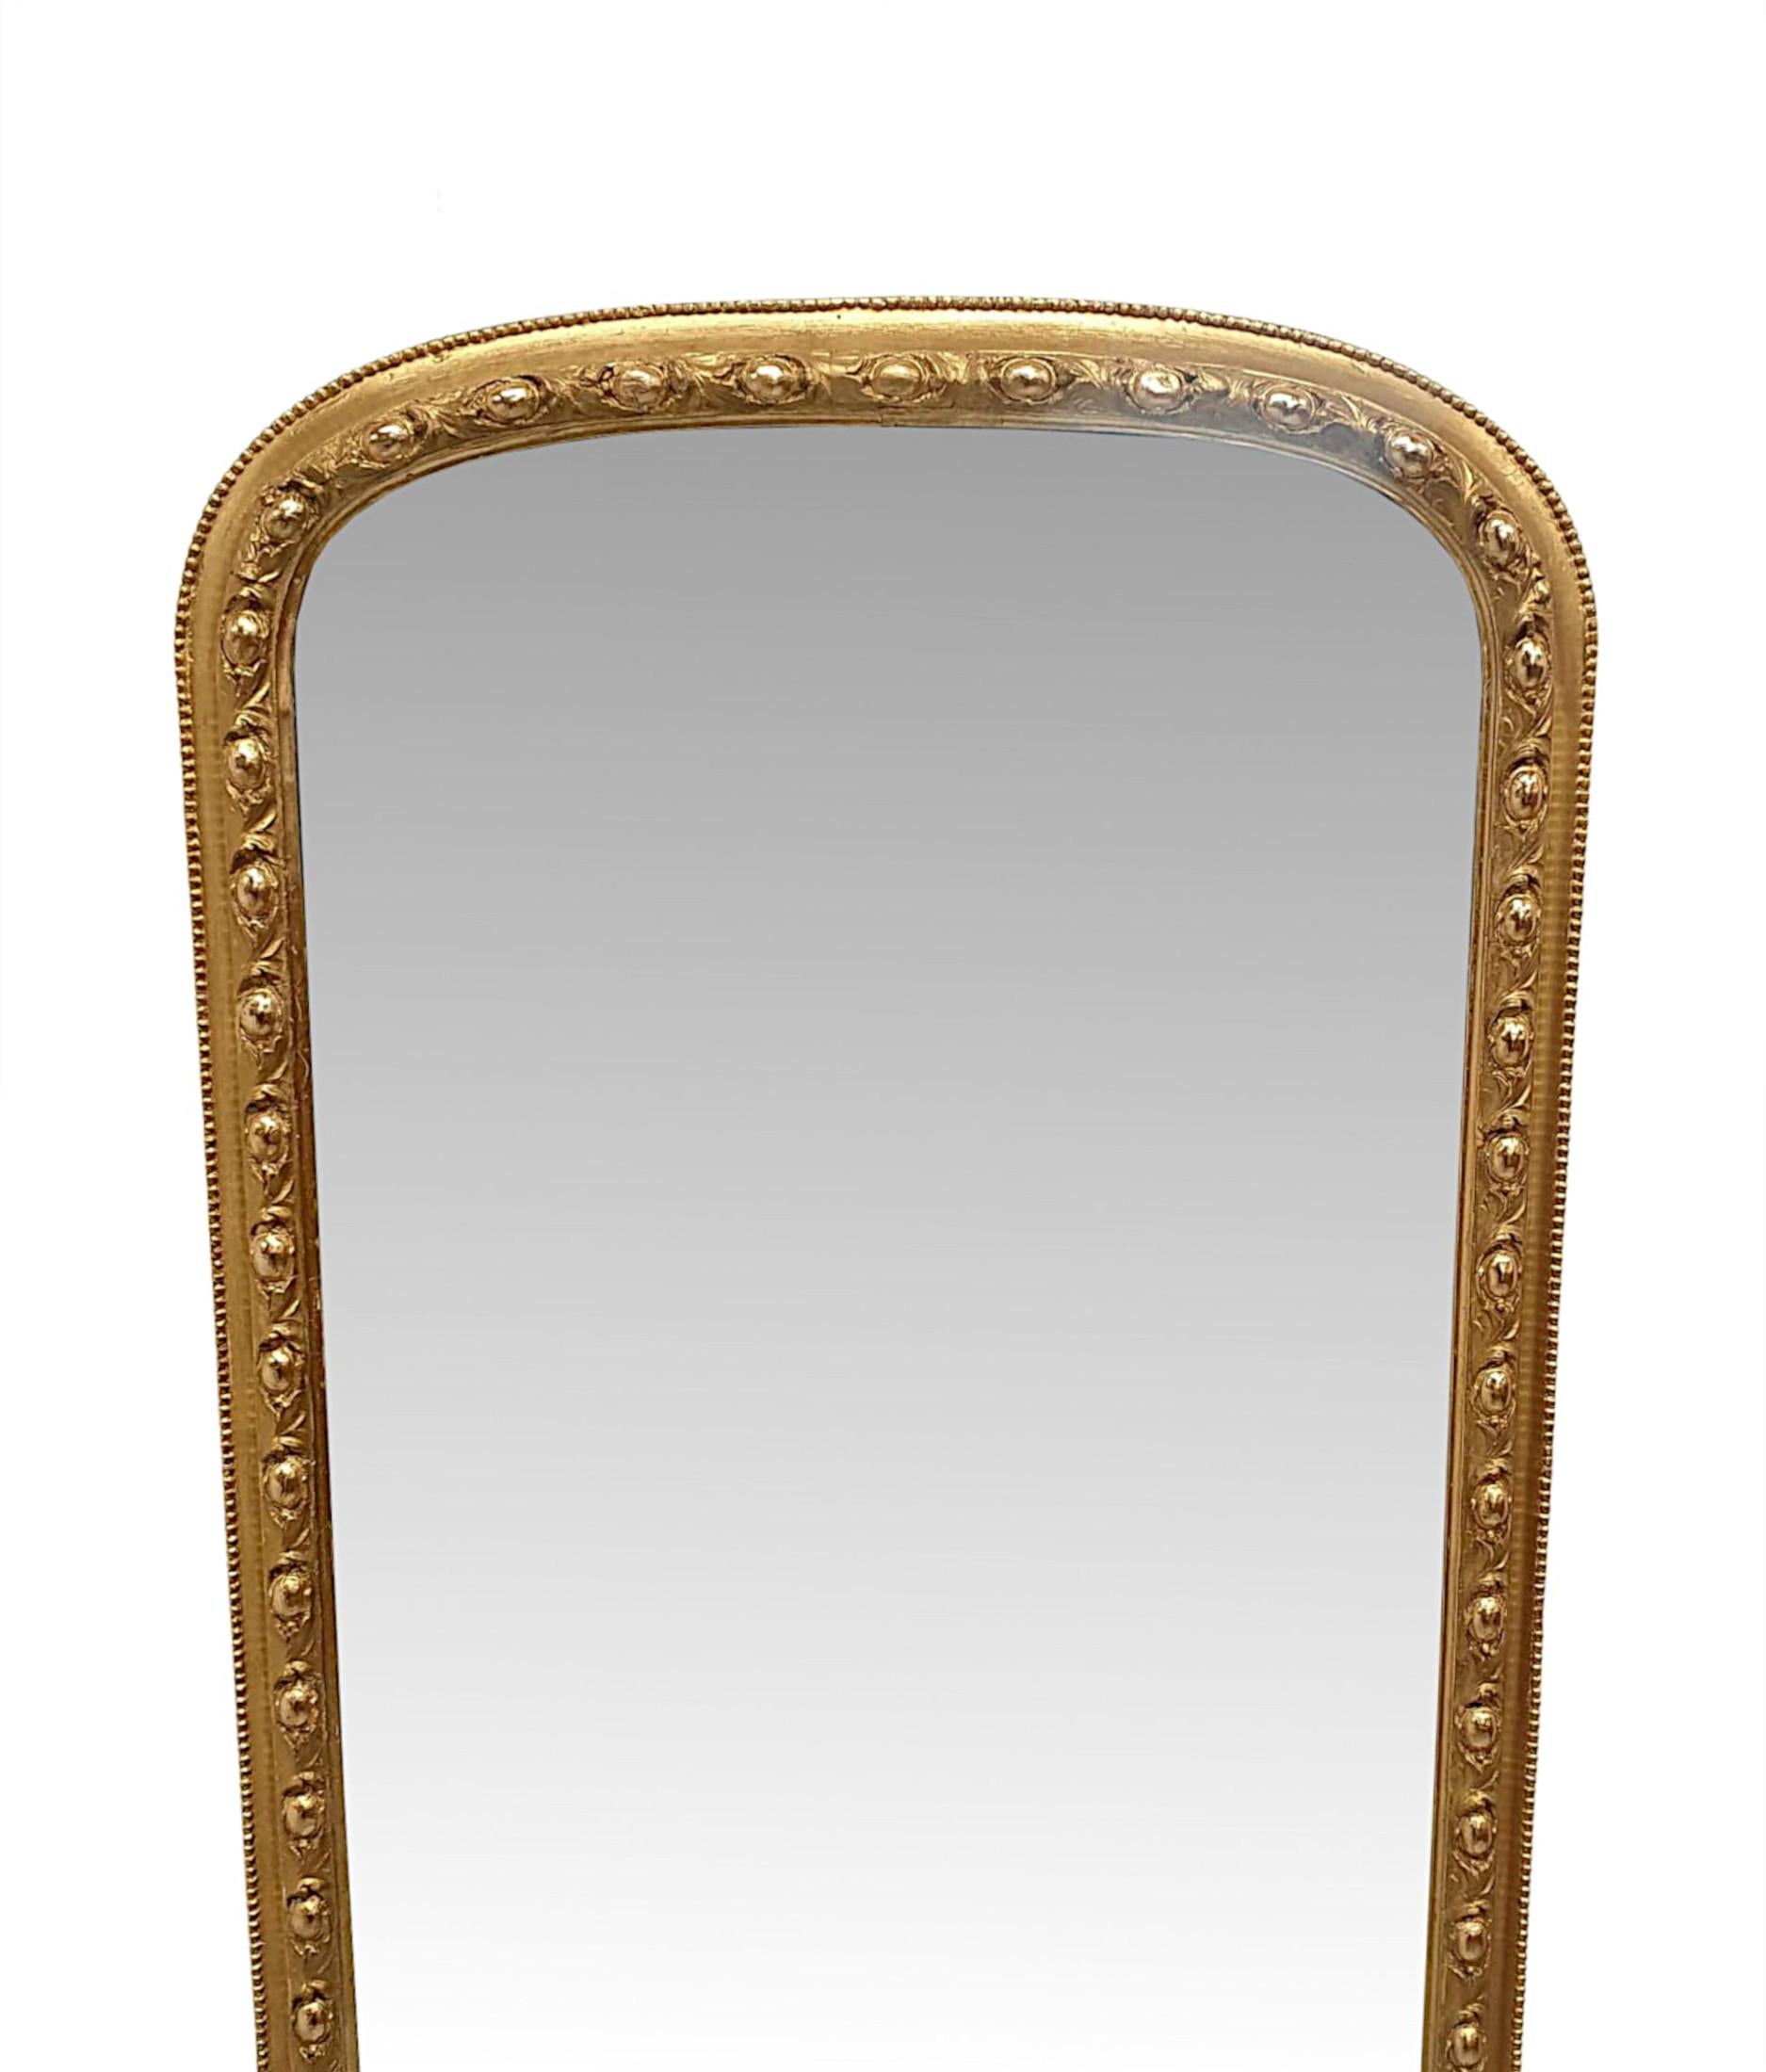 A very rare and fine 19th Century giltwood dressing or pier mirror, of exceptional quality and both tall and narrow proportions.  The mirror glass plate is set within a finely hand carved giltwood frame with curved top and alternating rows of